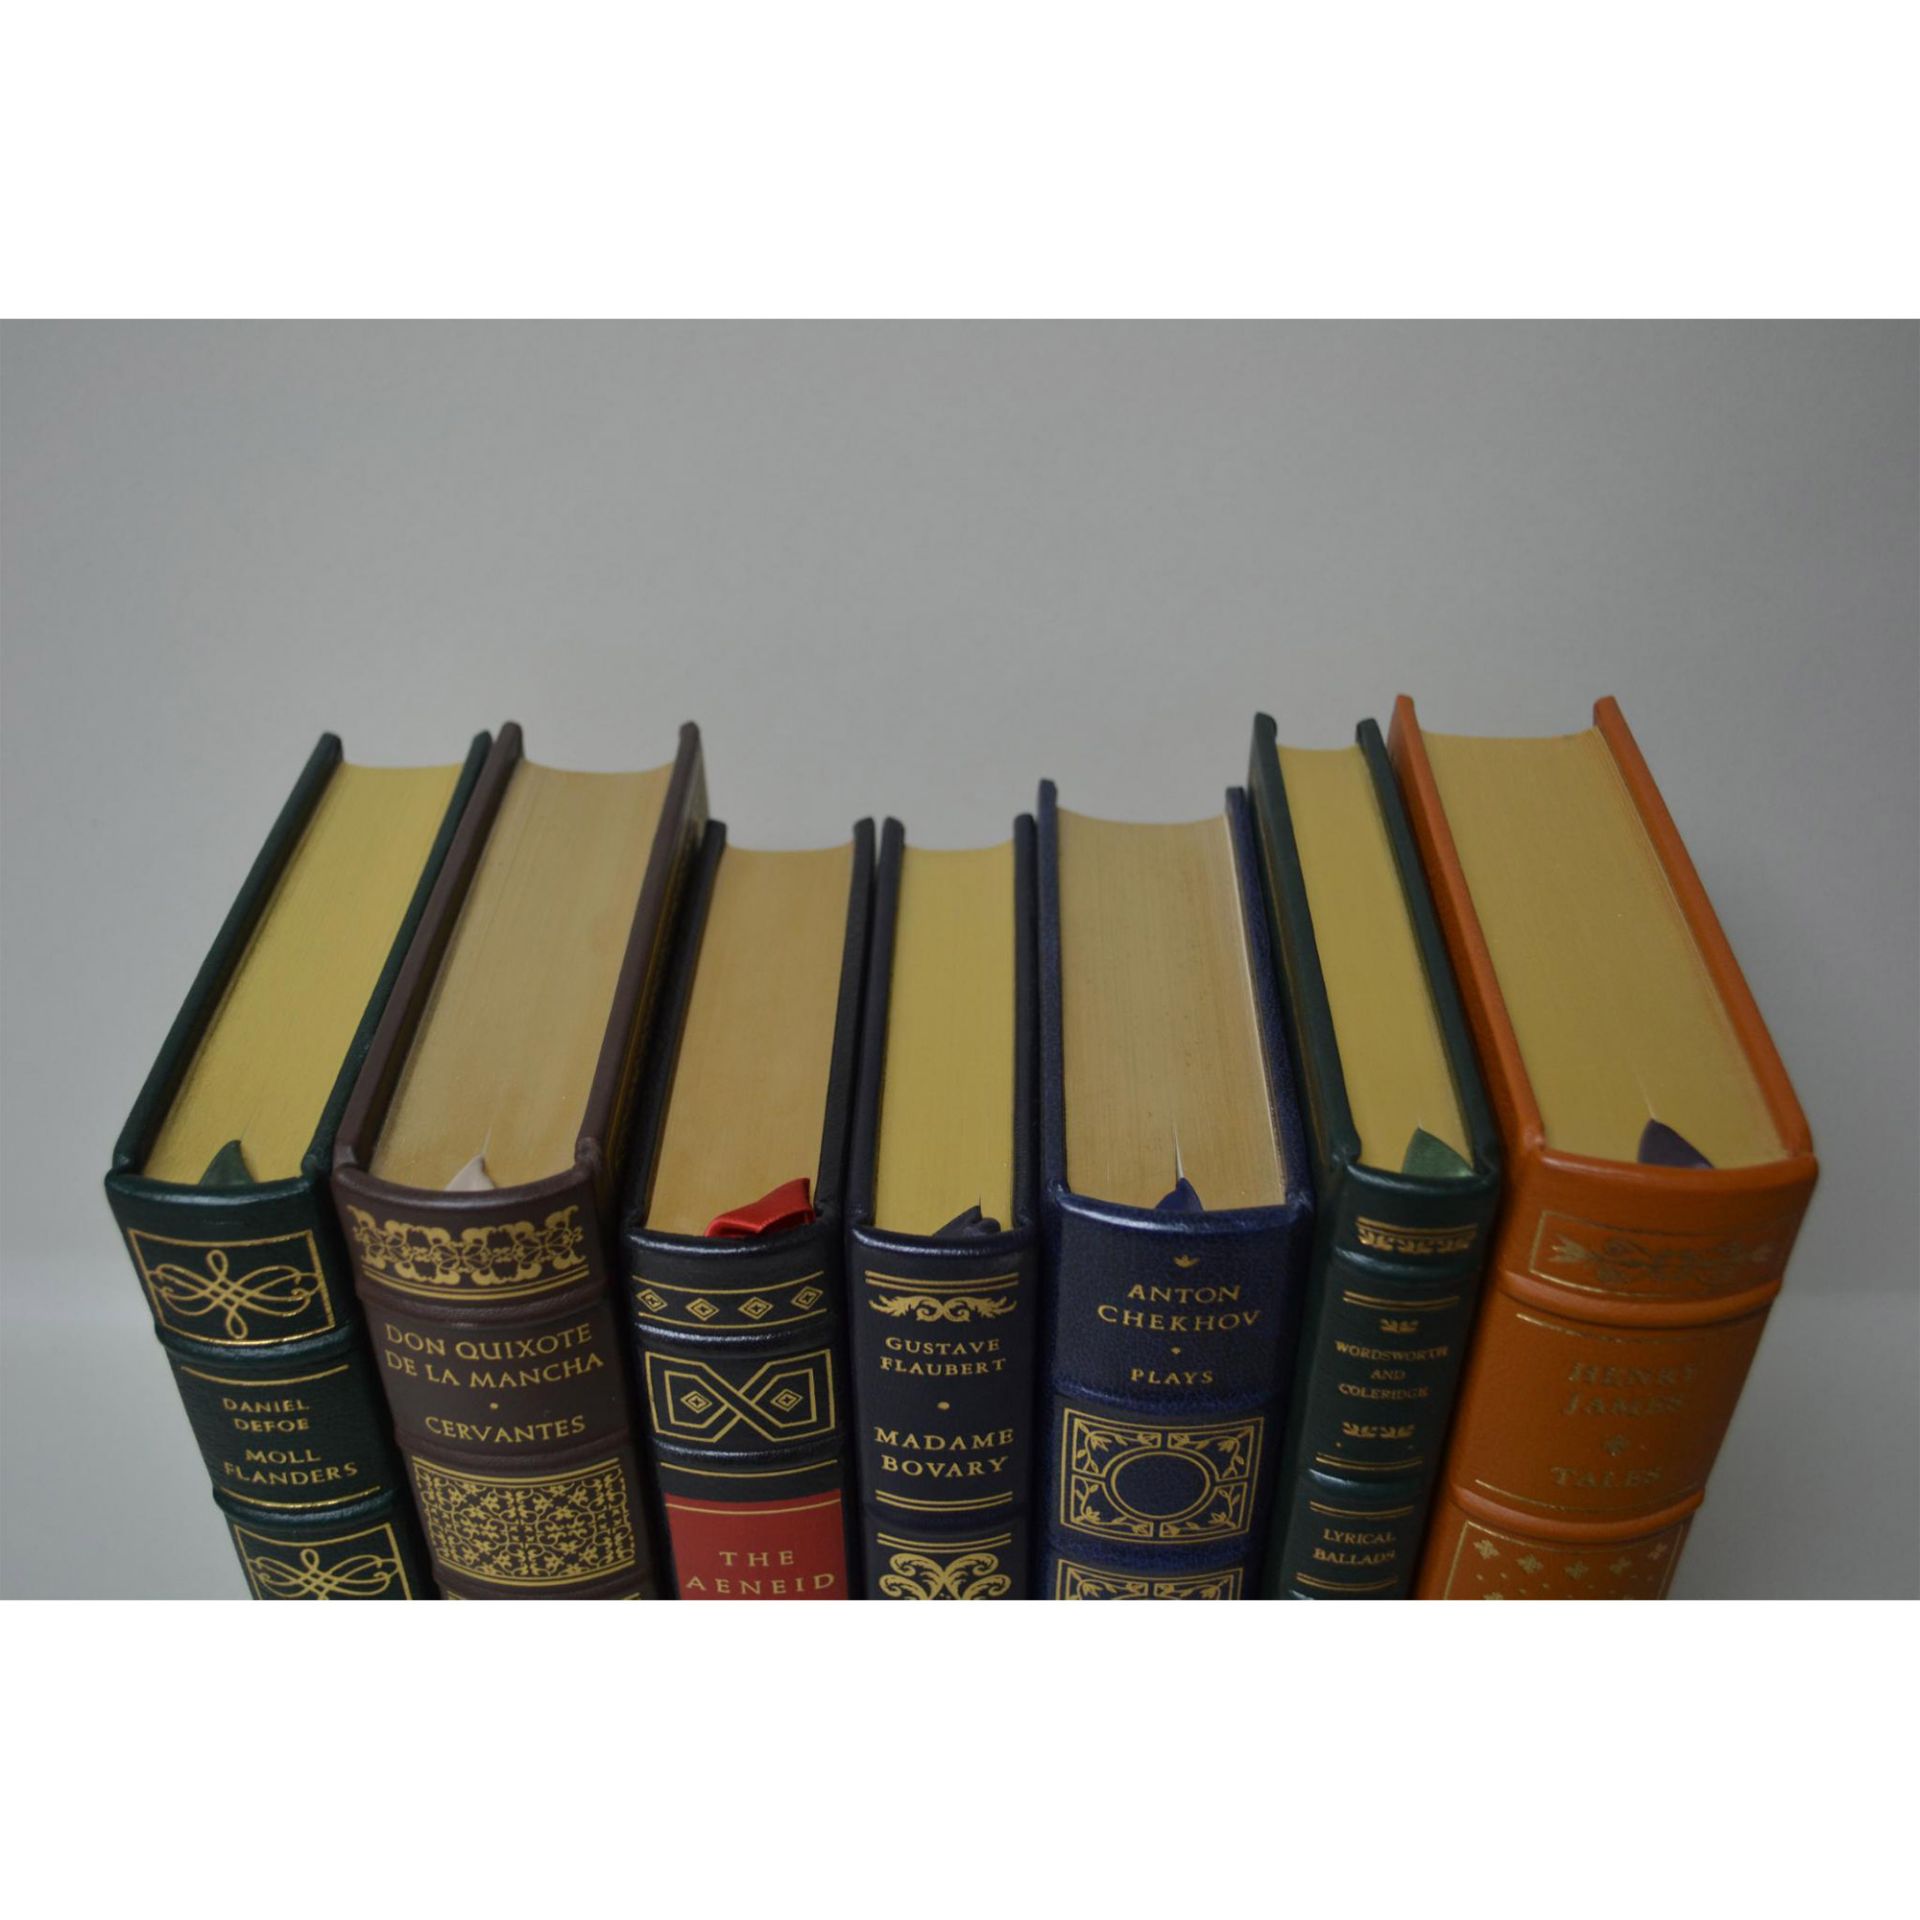 Vintage Full Leather Classics, Collection Of Seven Books, The Franklin Library - Image 2 of 8